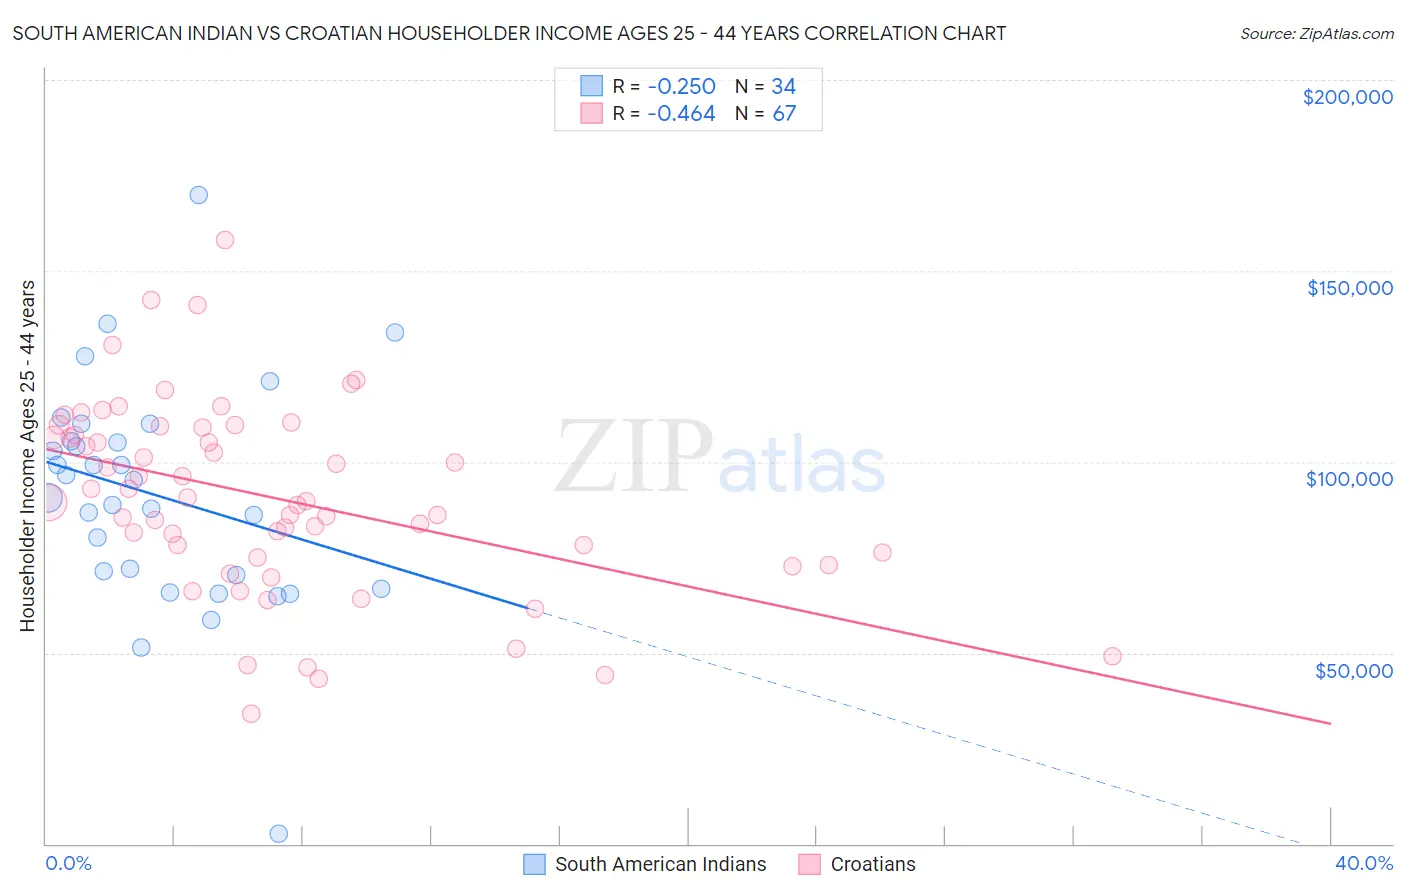 South American Indian vs Croatian Householder Income Ages 25 - 44 years